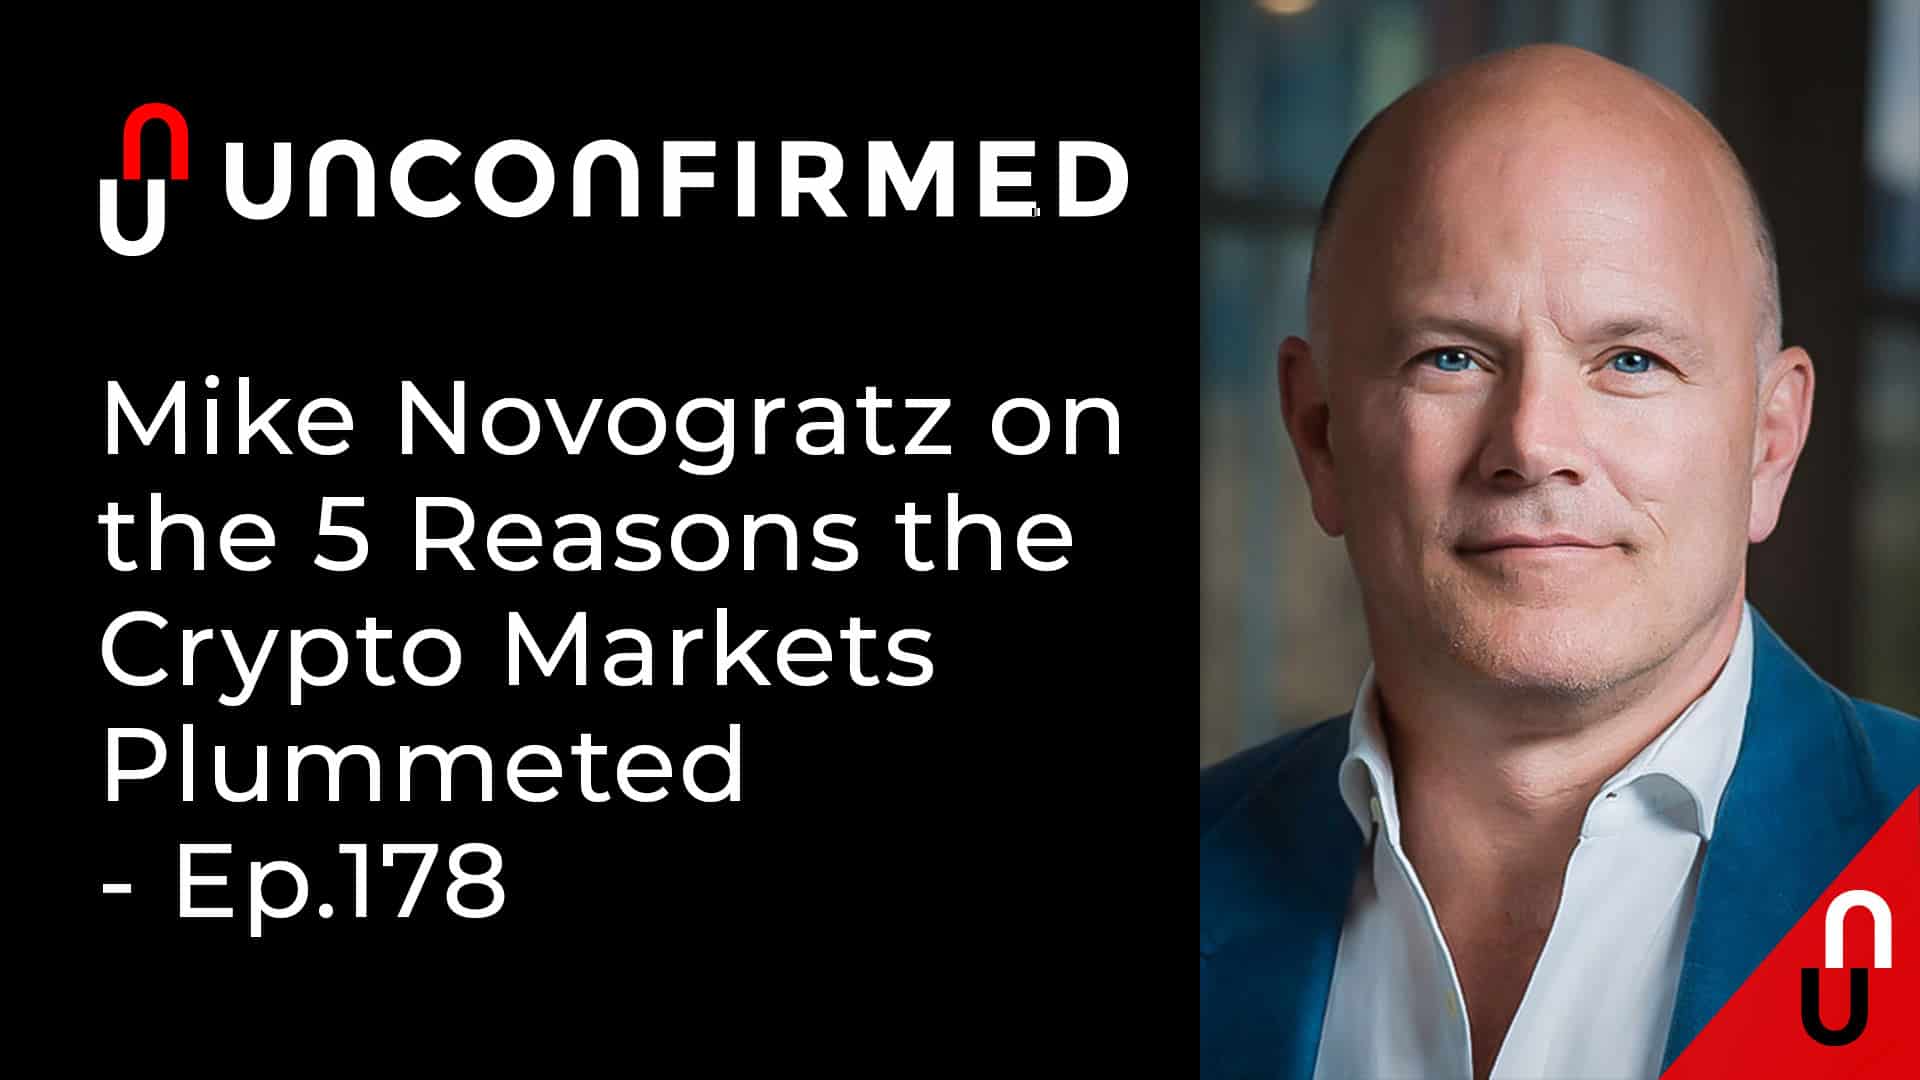 Unconfirmed - Ep.178 - Mike Novogratz on the 5 Reasons the Crypto Markets Plummeted